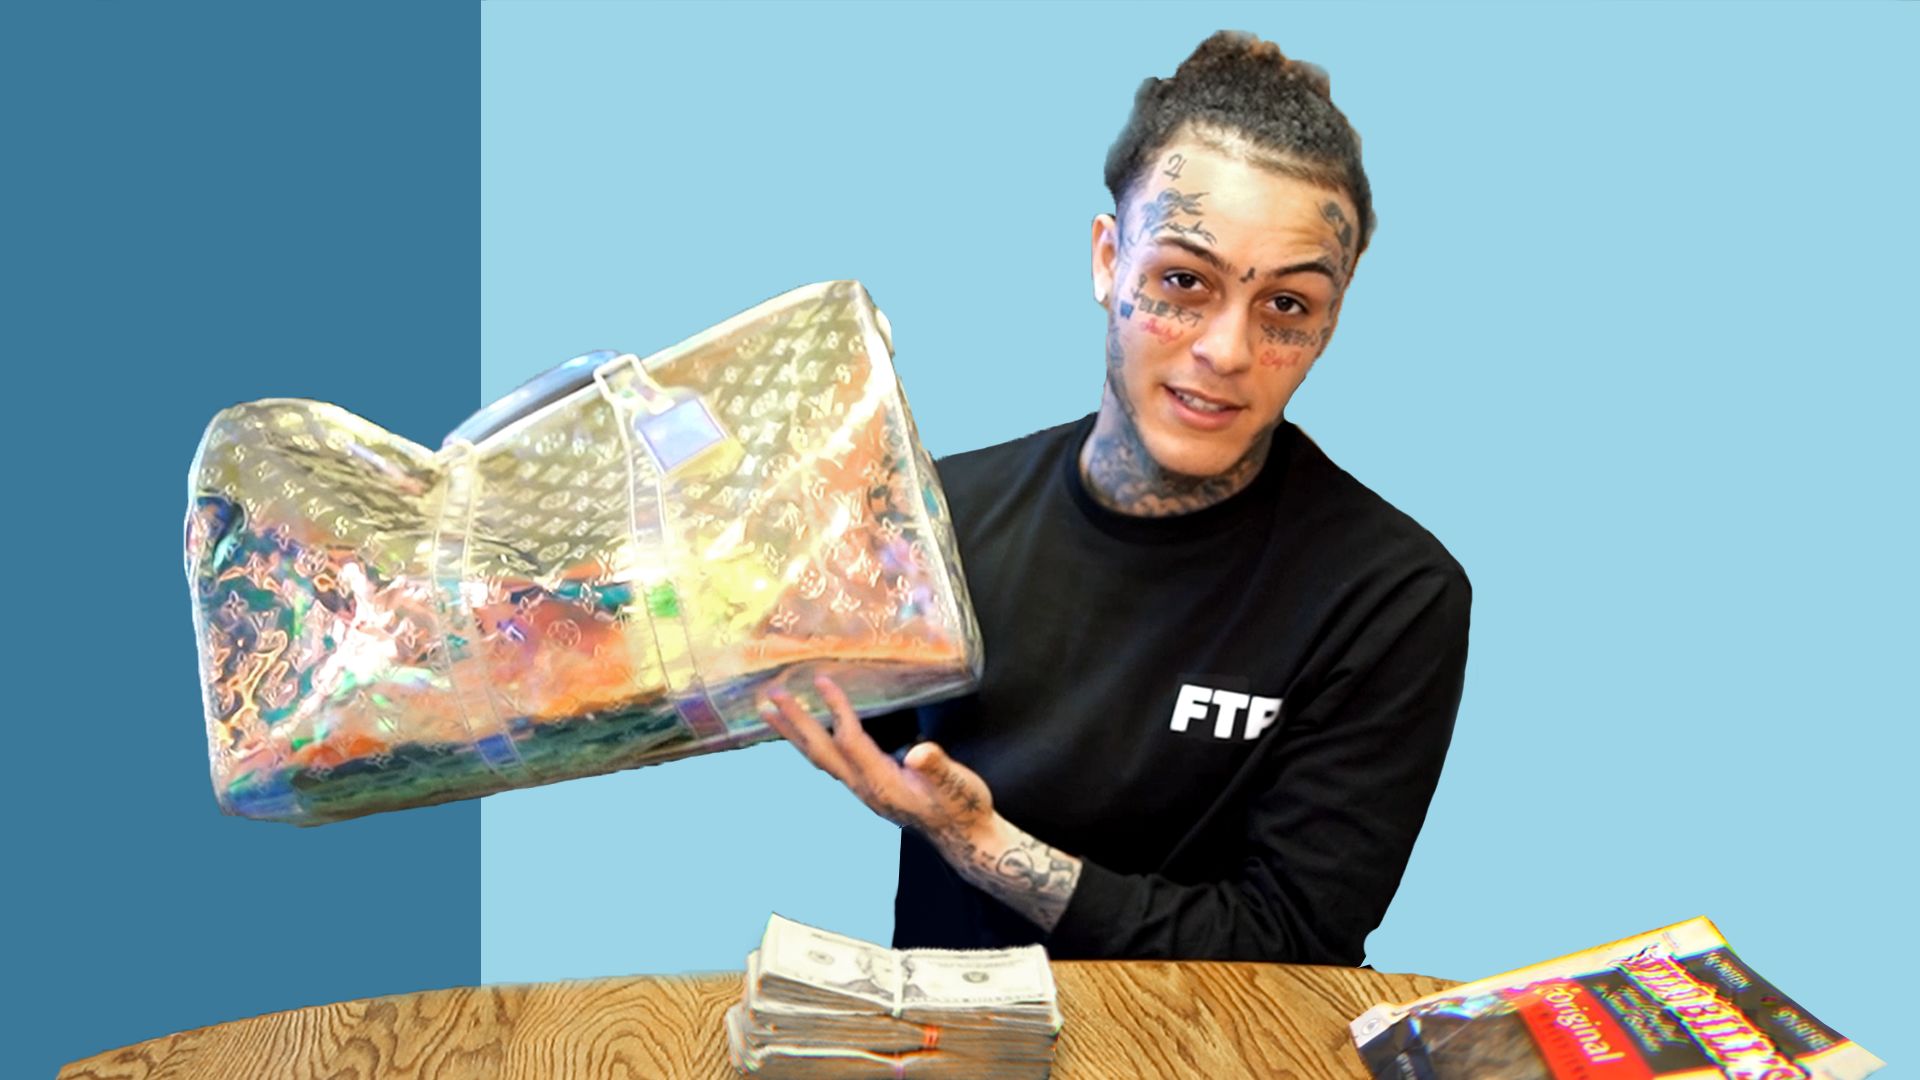 Lil skies pictures